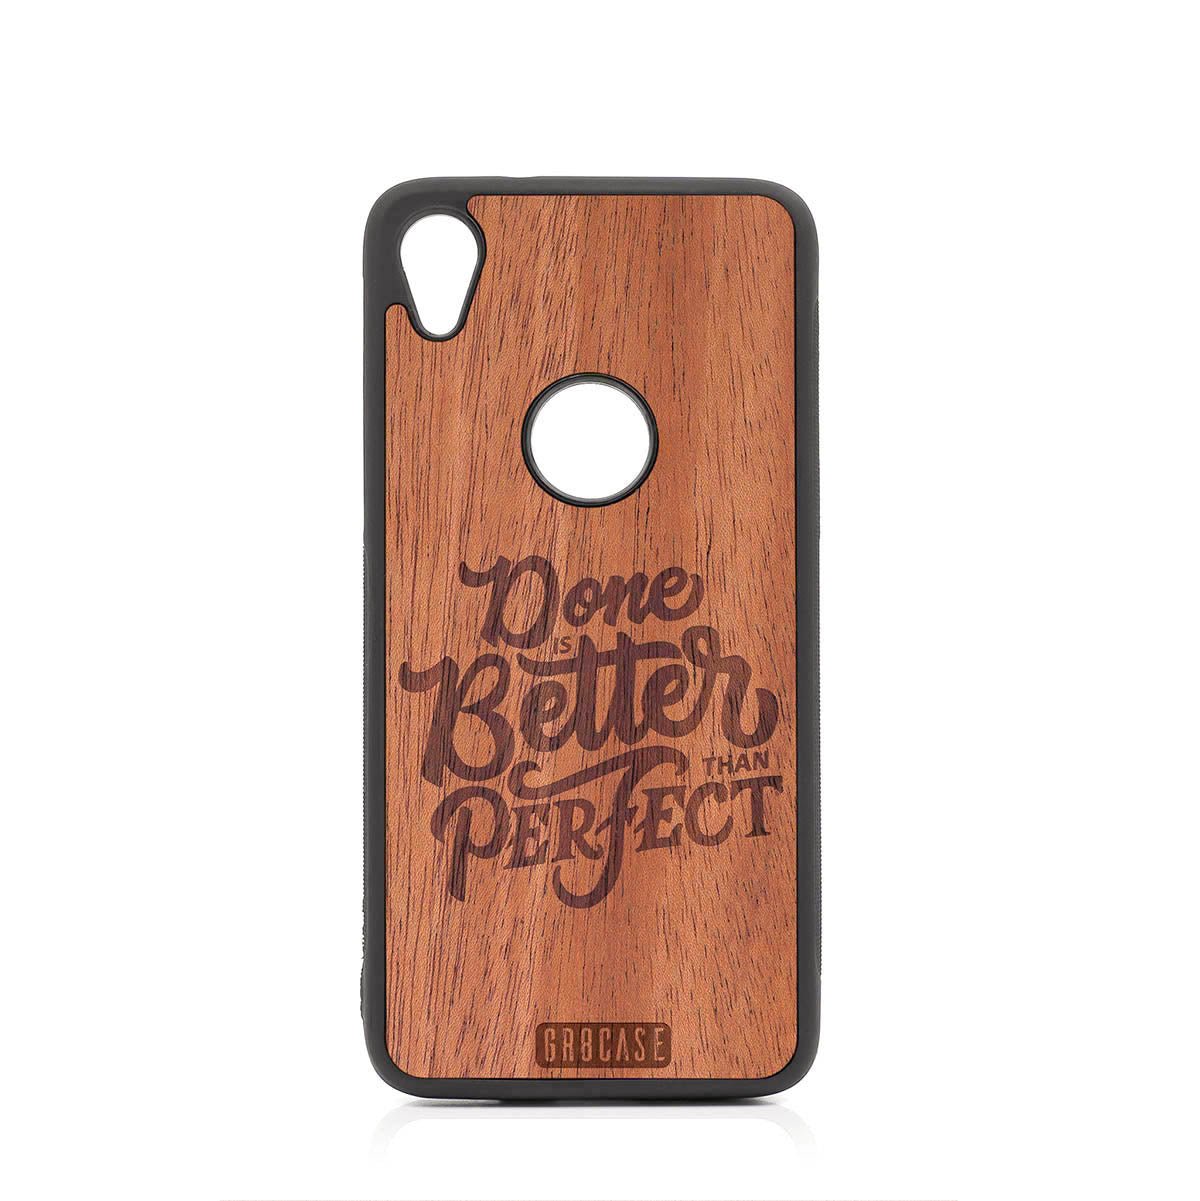 Done Is Better Than Perfect Design Wood Case For Moto E6 by GR8CASE